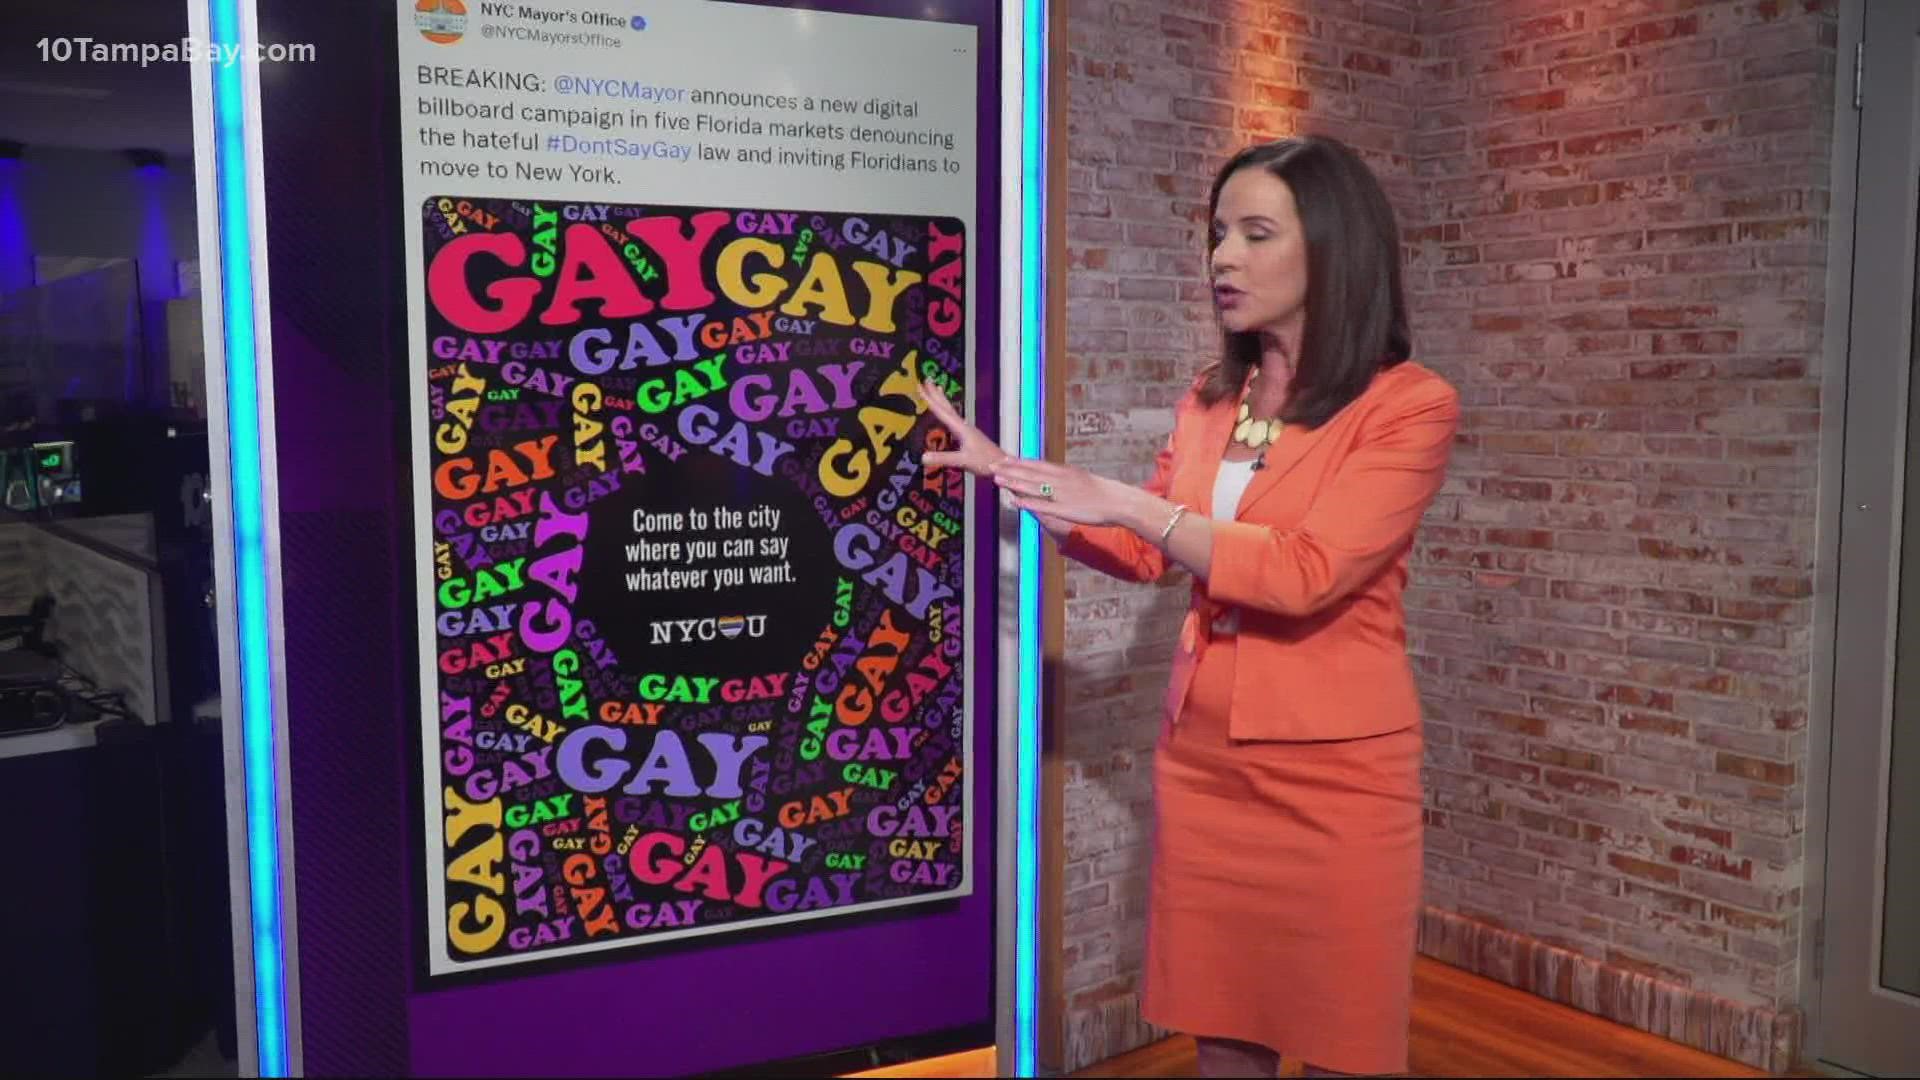 The billboards targeting what critics call the "Don't Say Gay" bill are part of a campaign to invite Floridians to move to New York, the mayor's office says.